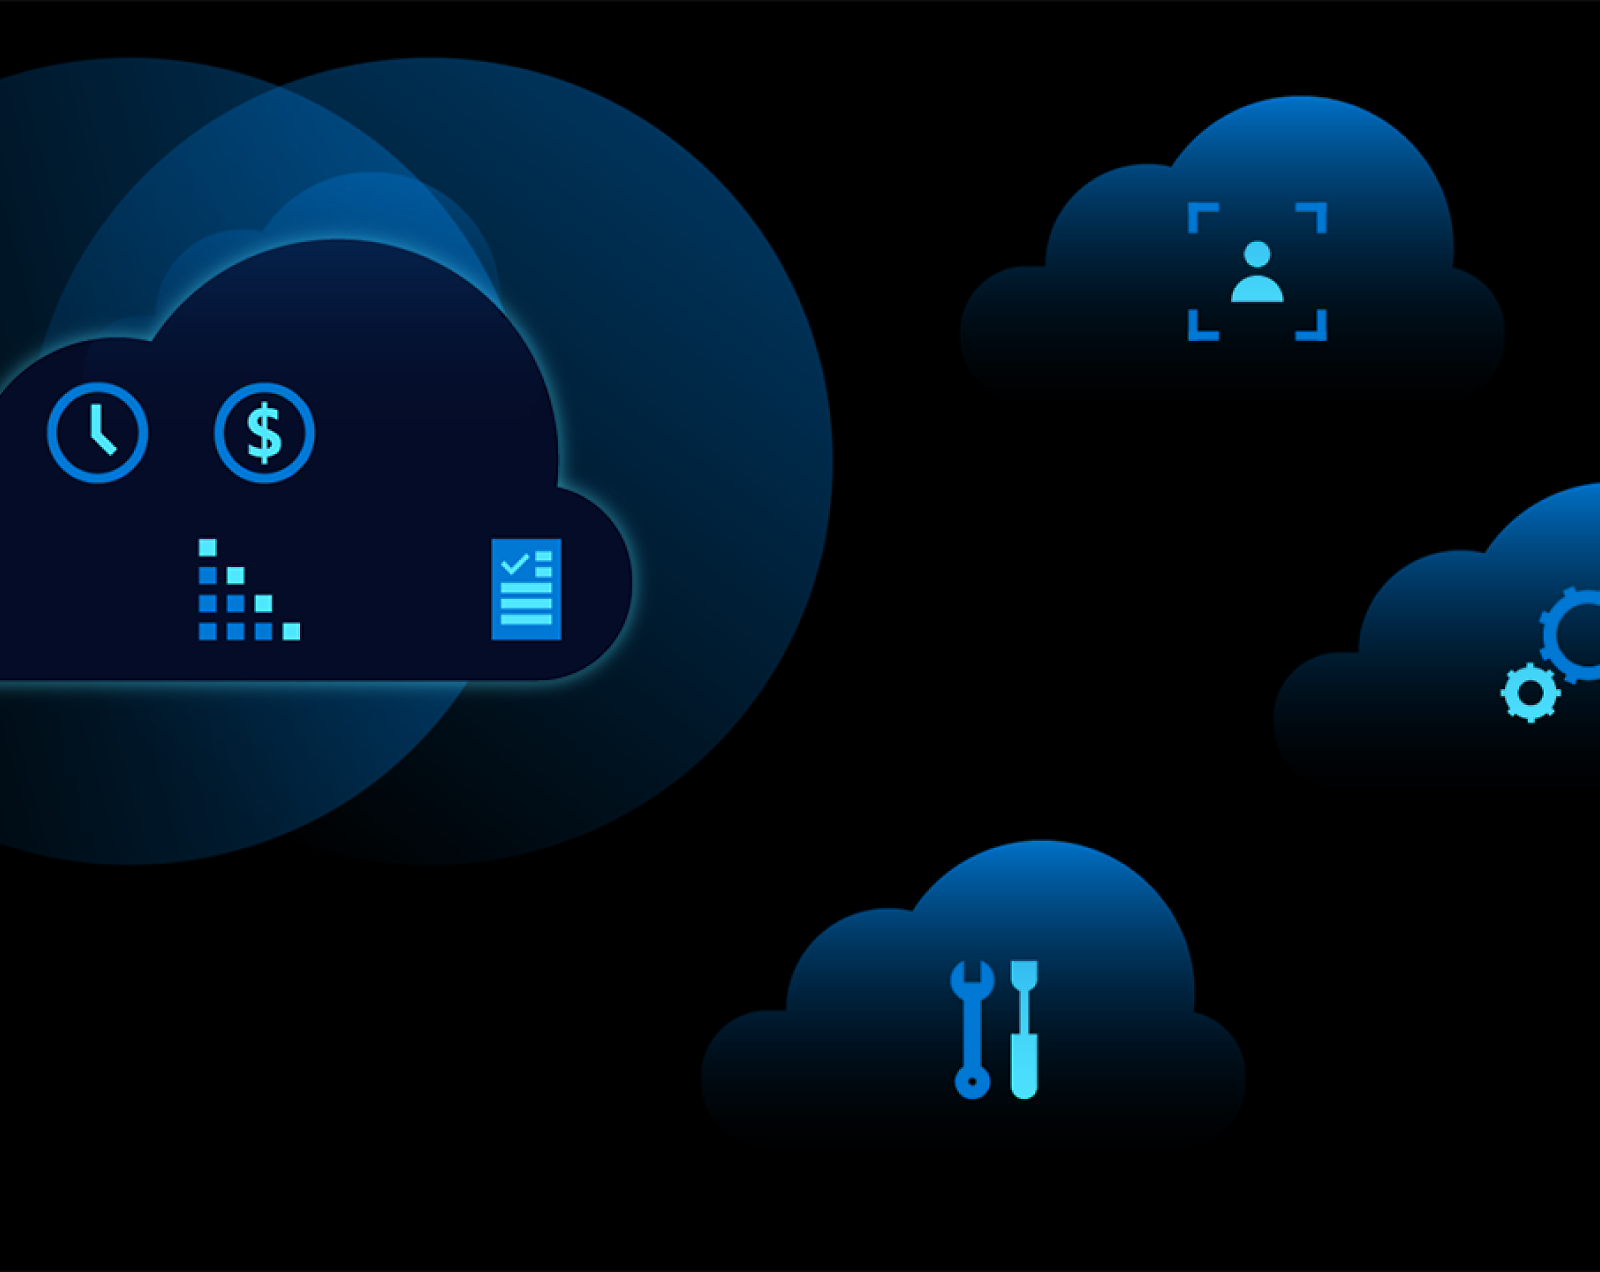 A cloud computing icons on a black background